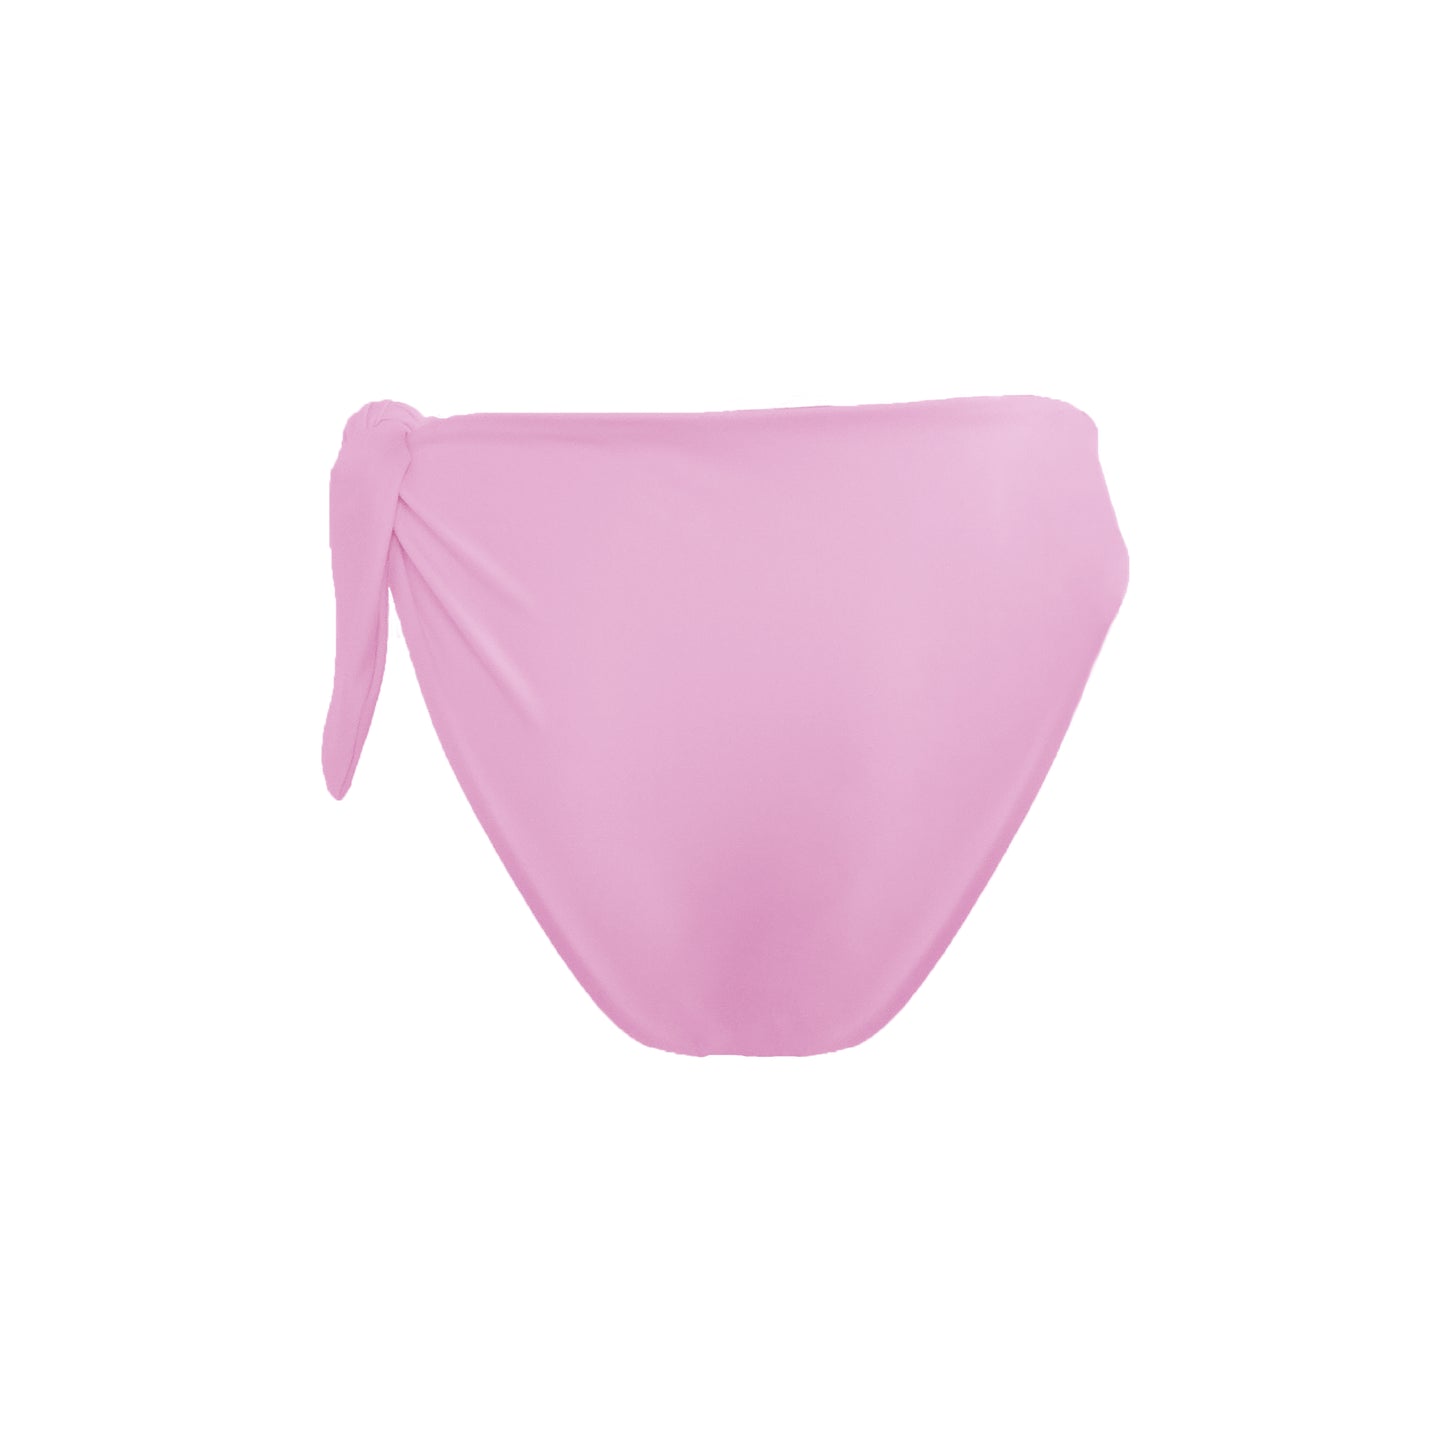 Back view of pastel Pink Capri bikini bottom with asymmetric adjustable side tie and cheeky bum coverage.